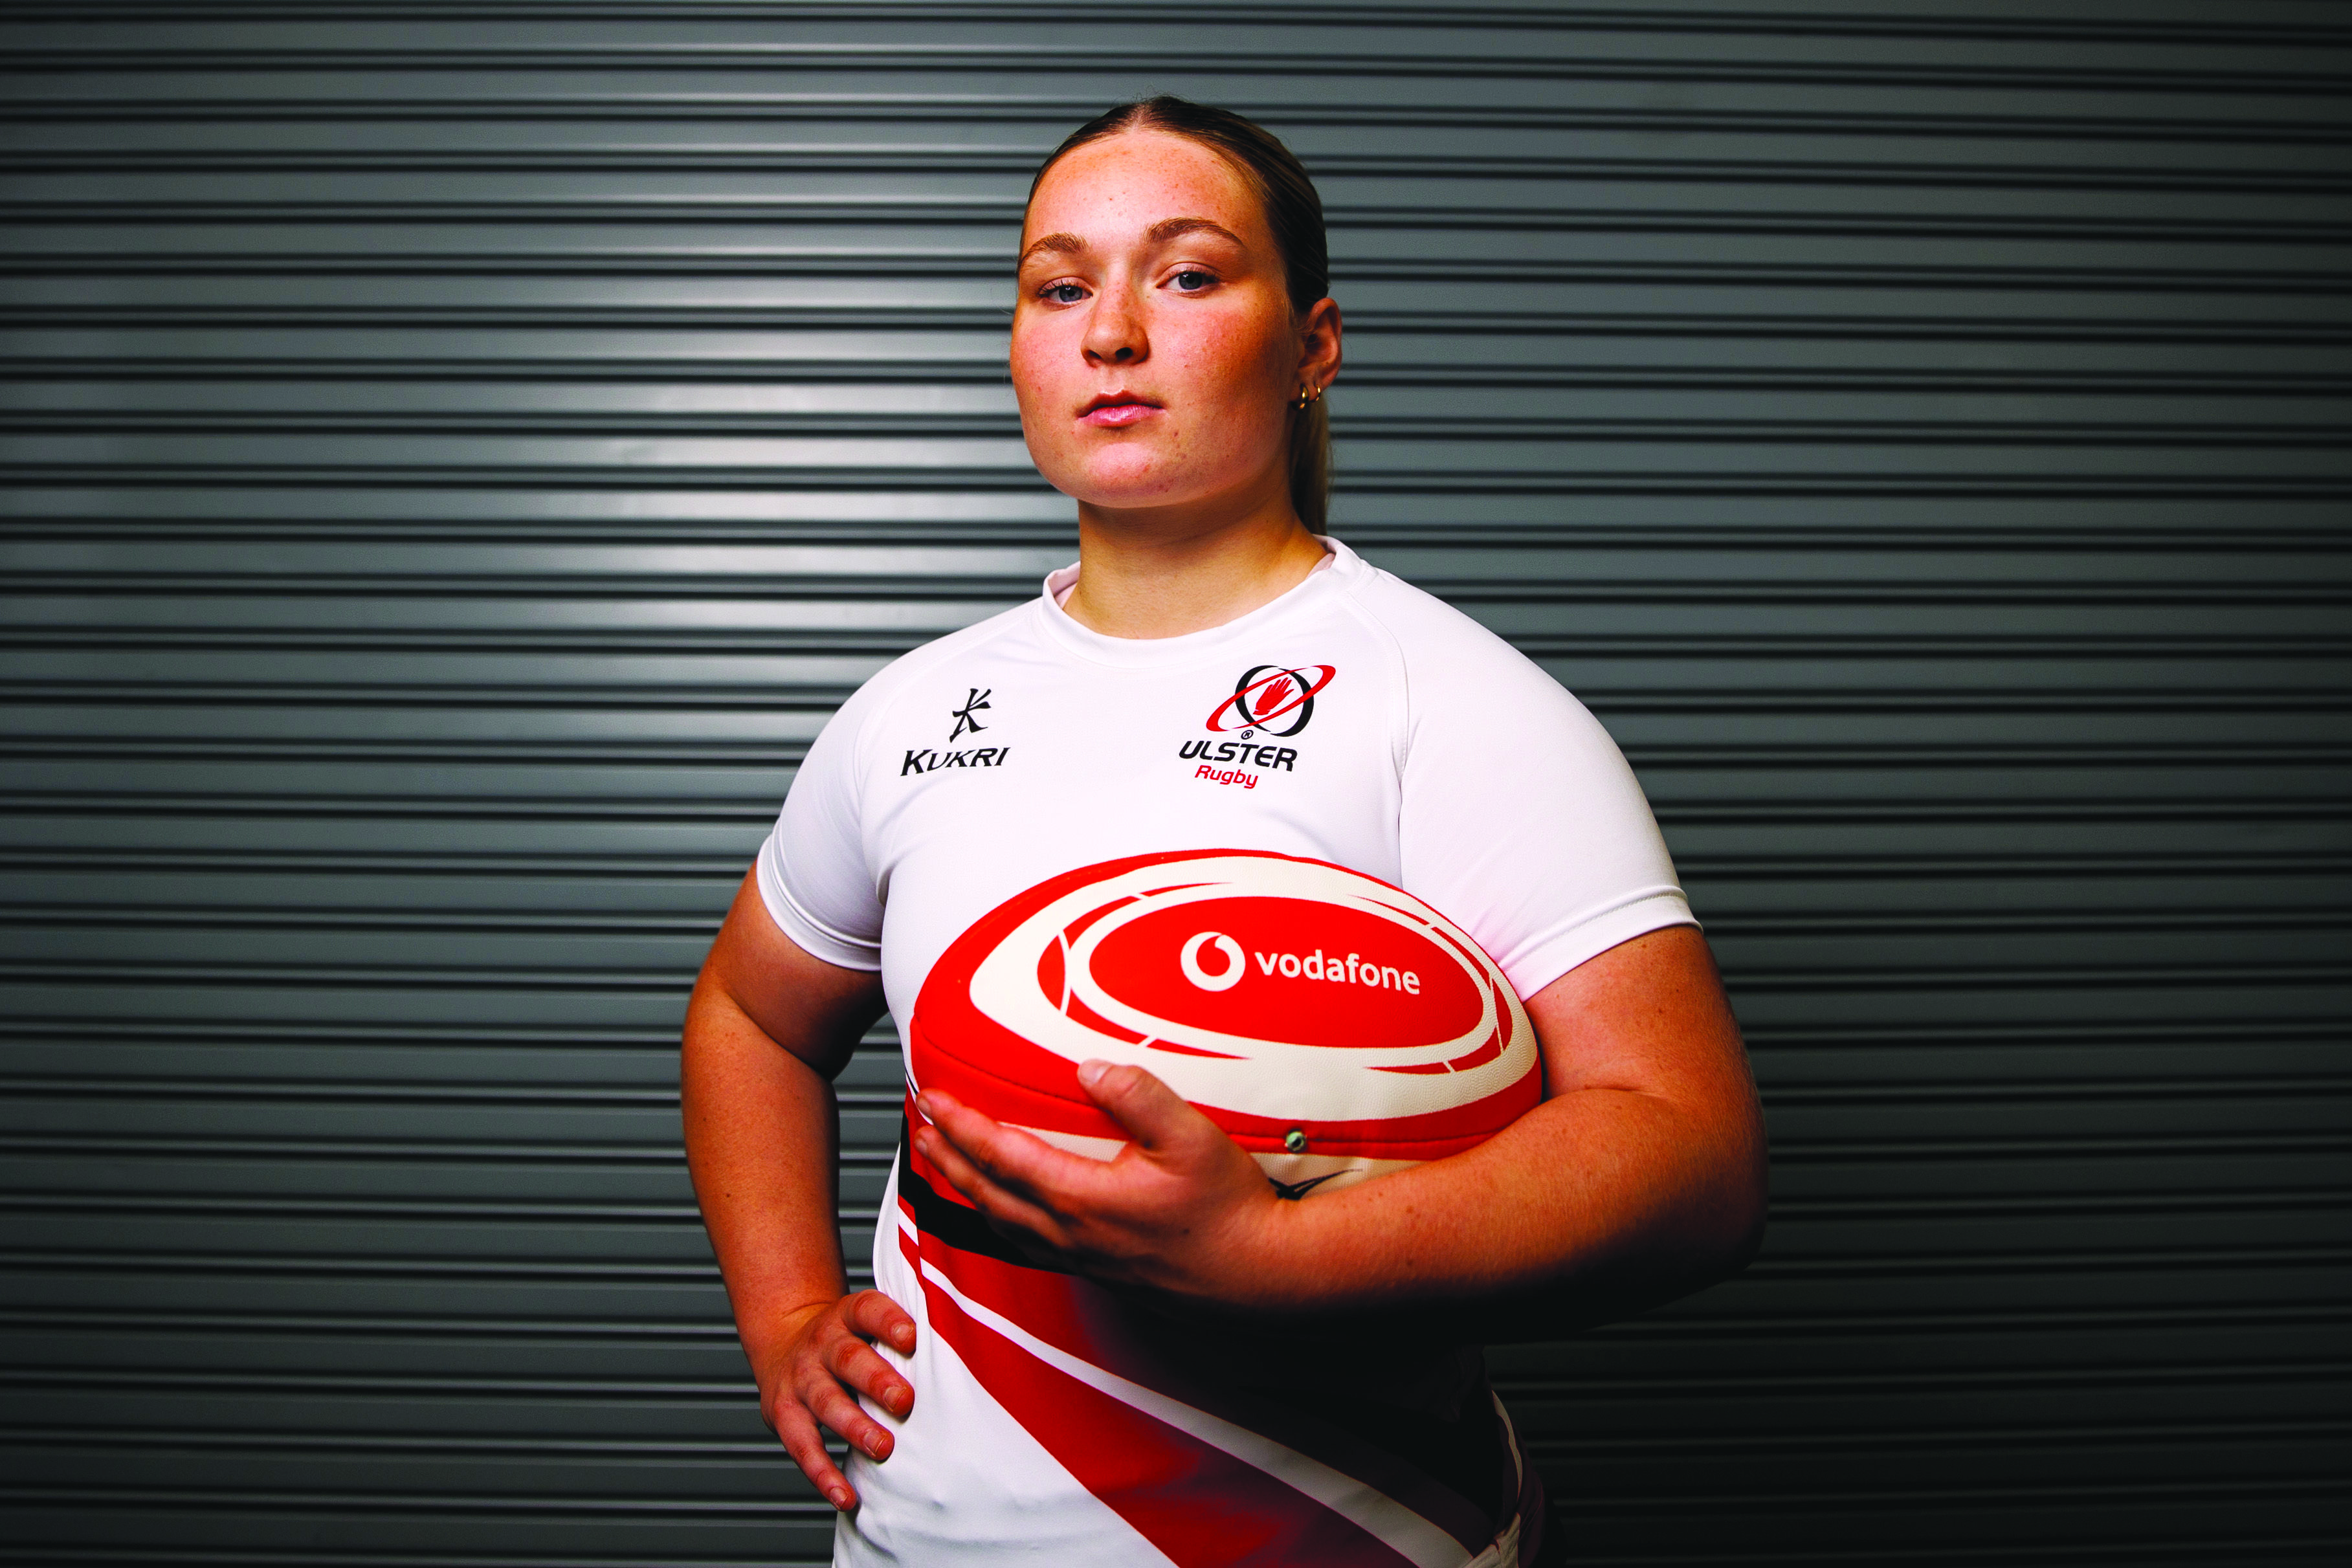 Sadhbh McGrath is awaiting the outcome of her Leaving Cert while preparing for Ulster’s opener against Munster this week